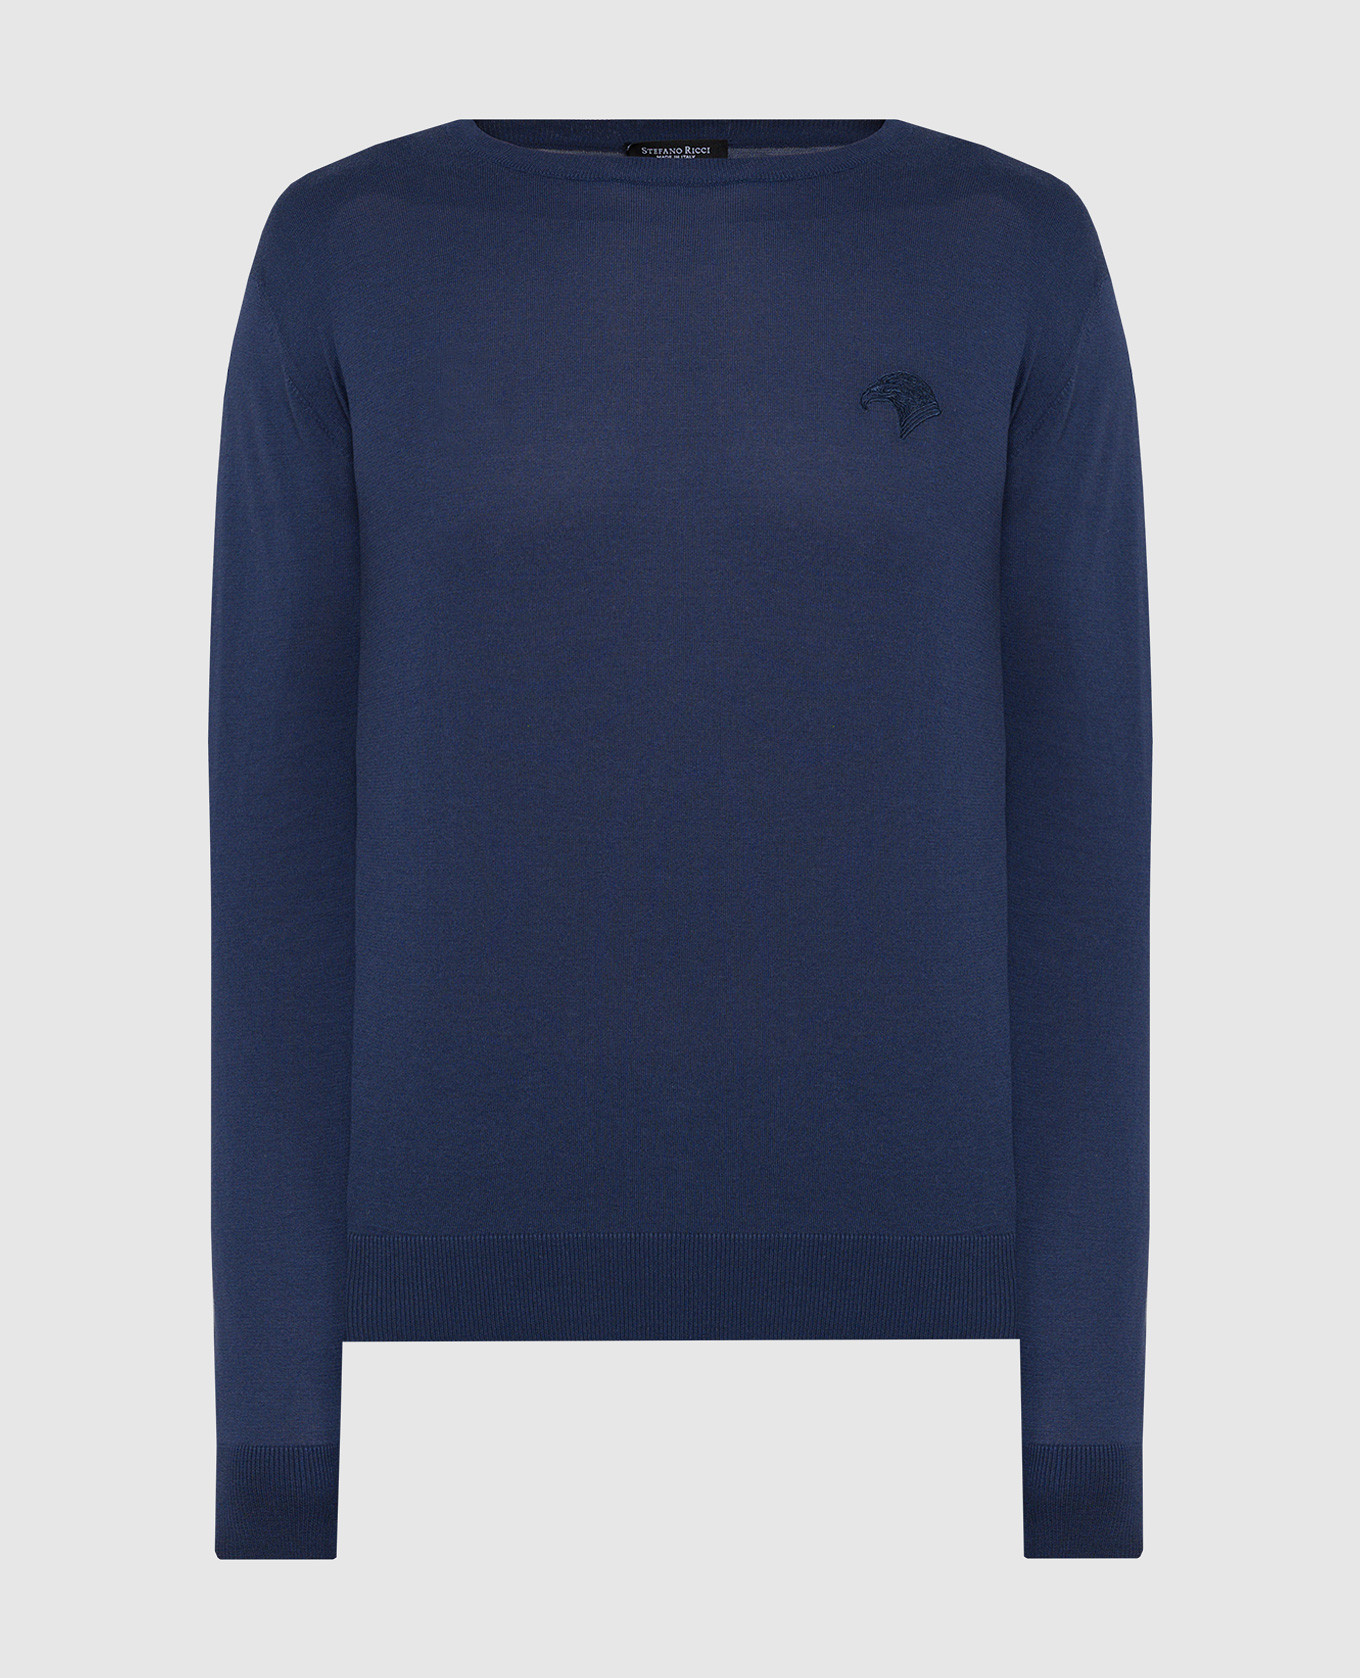 Blue jumper with eagle head logo embroidery